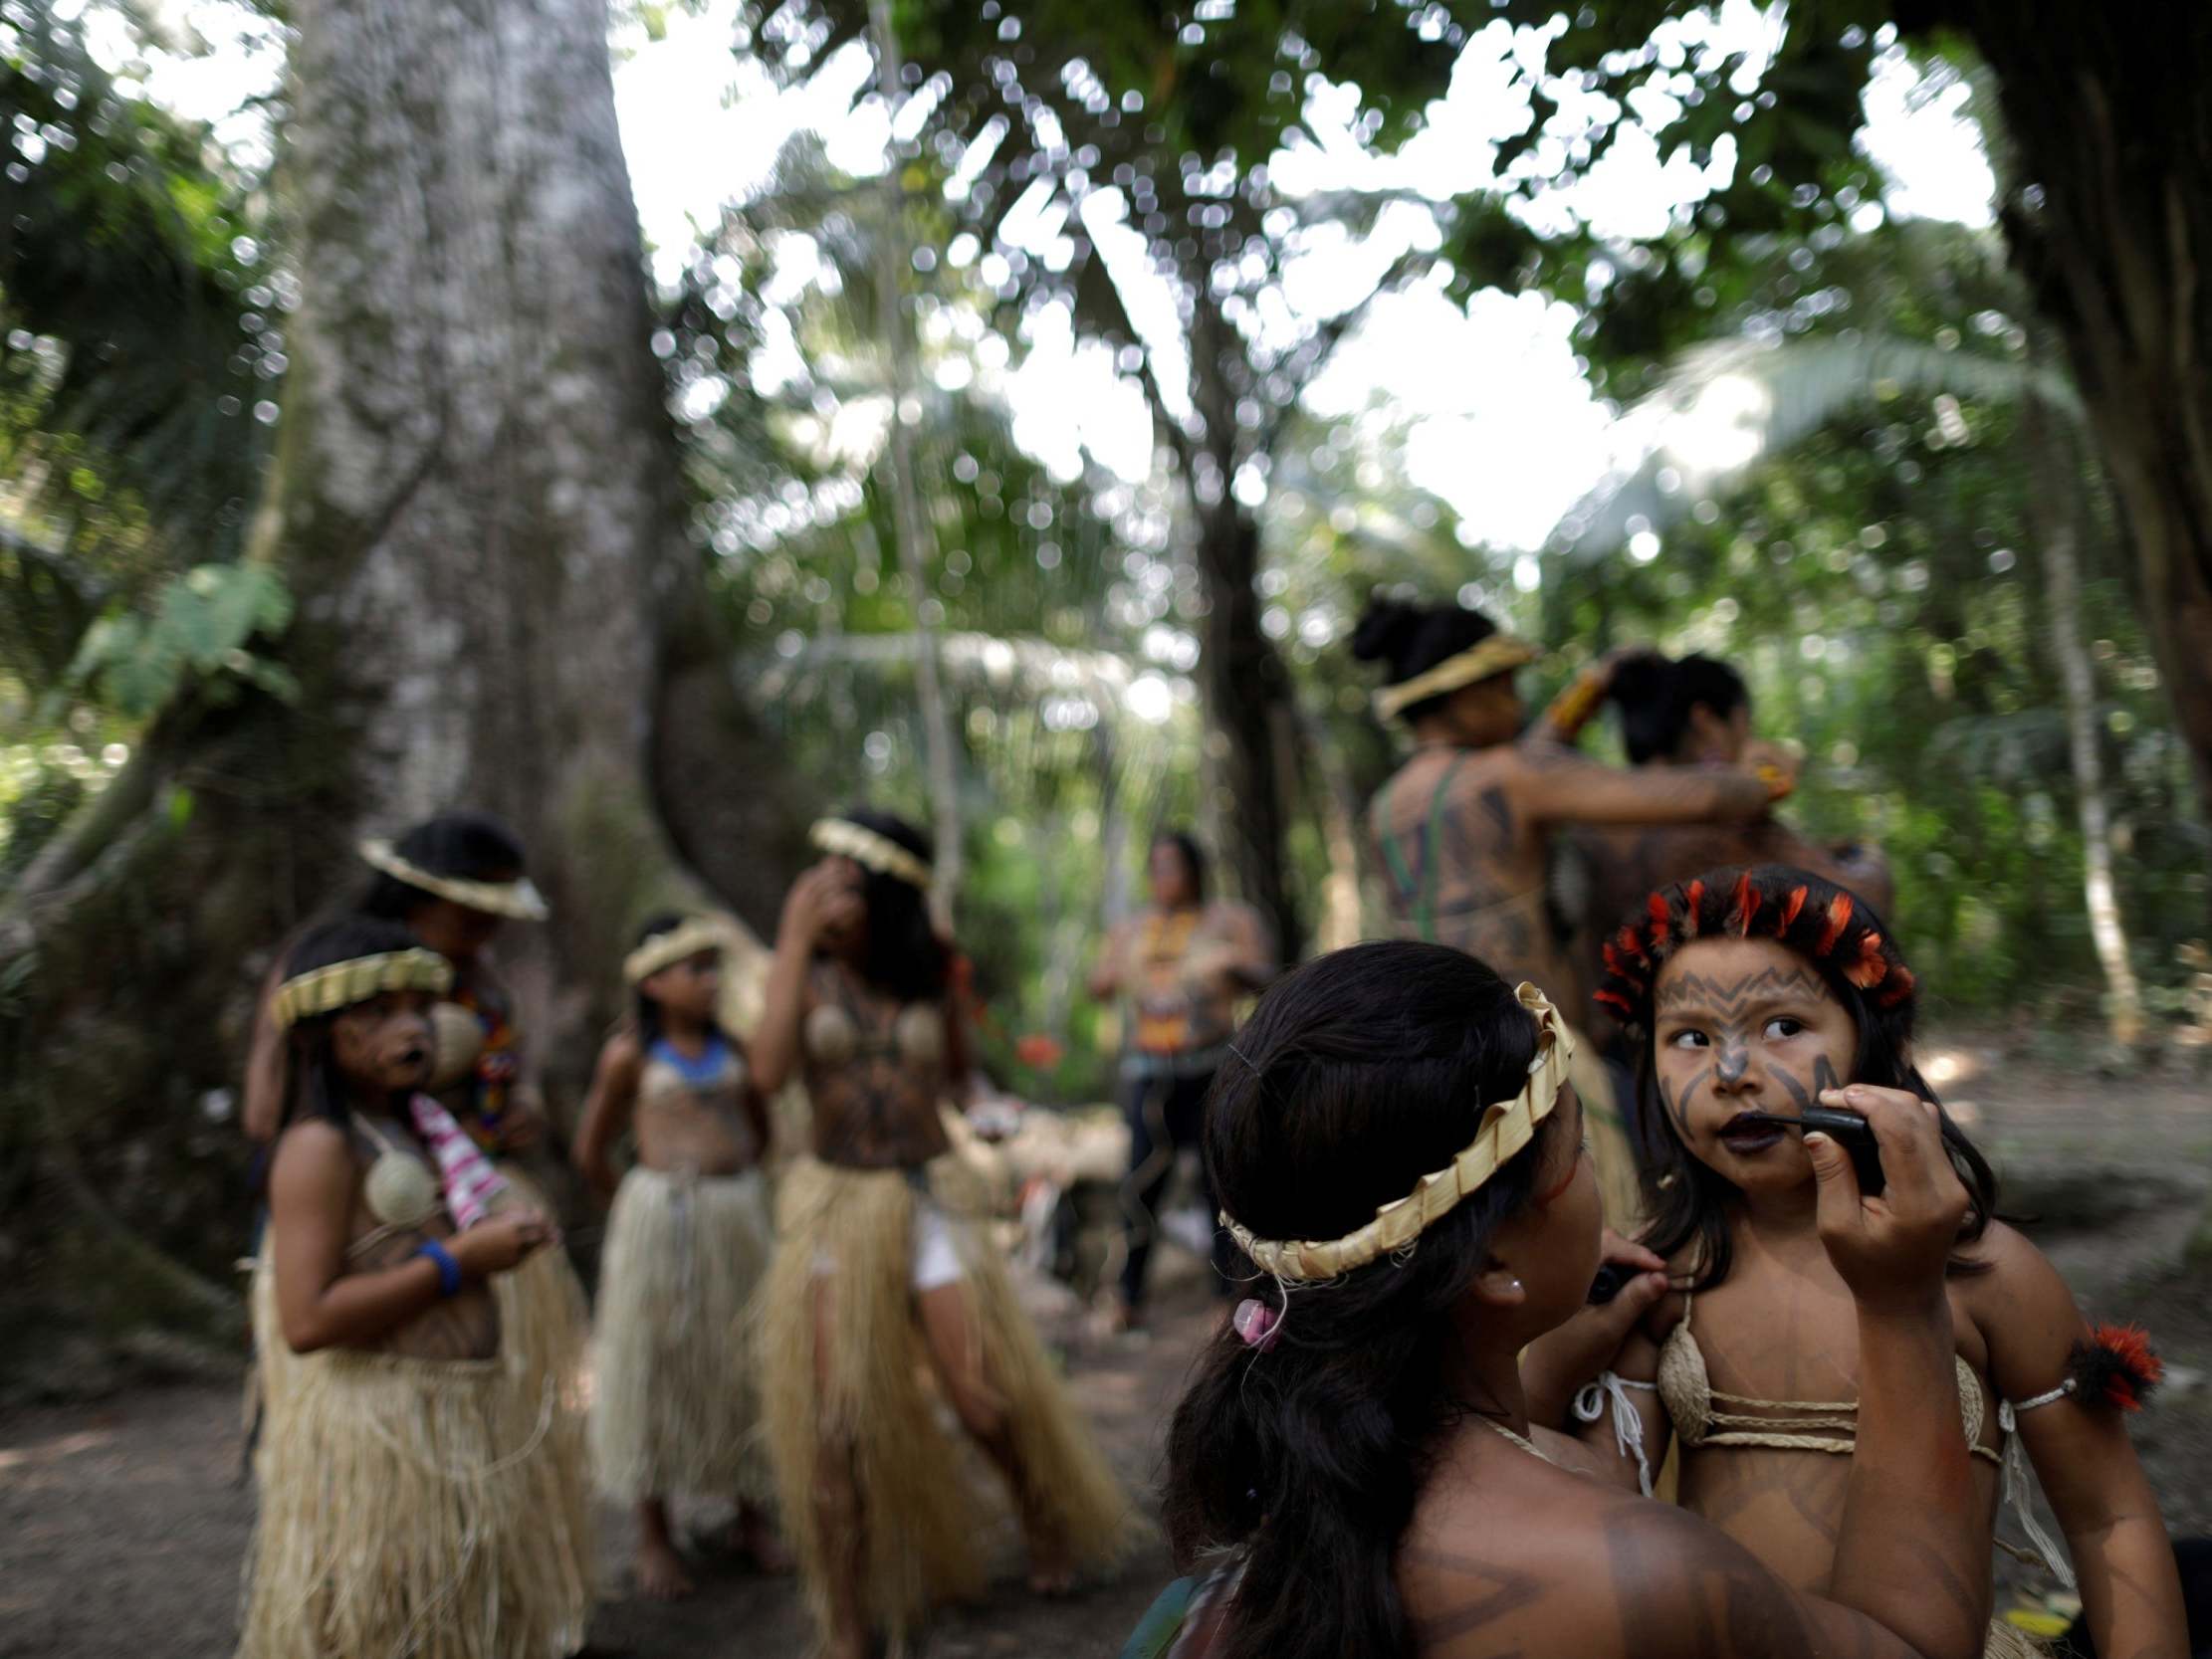 amazonian tribes hunting